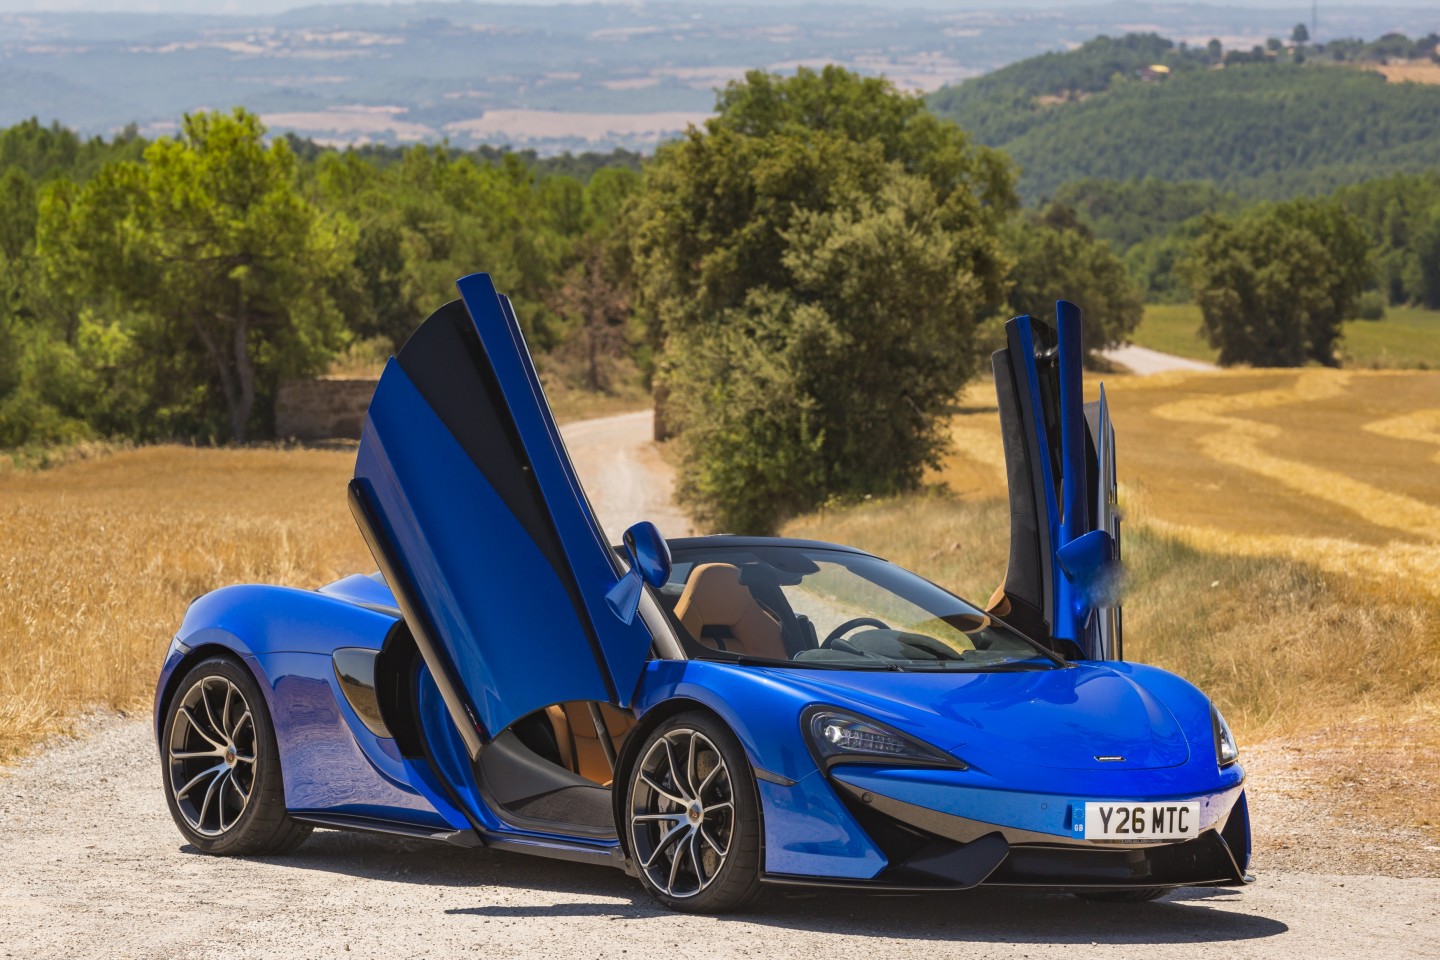 A signature feature of most supercars, but especially the McLaren, are these butterfly wing doors